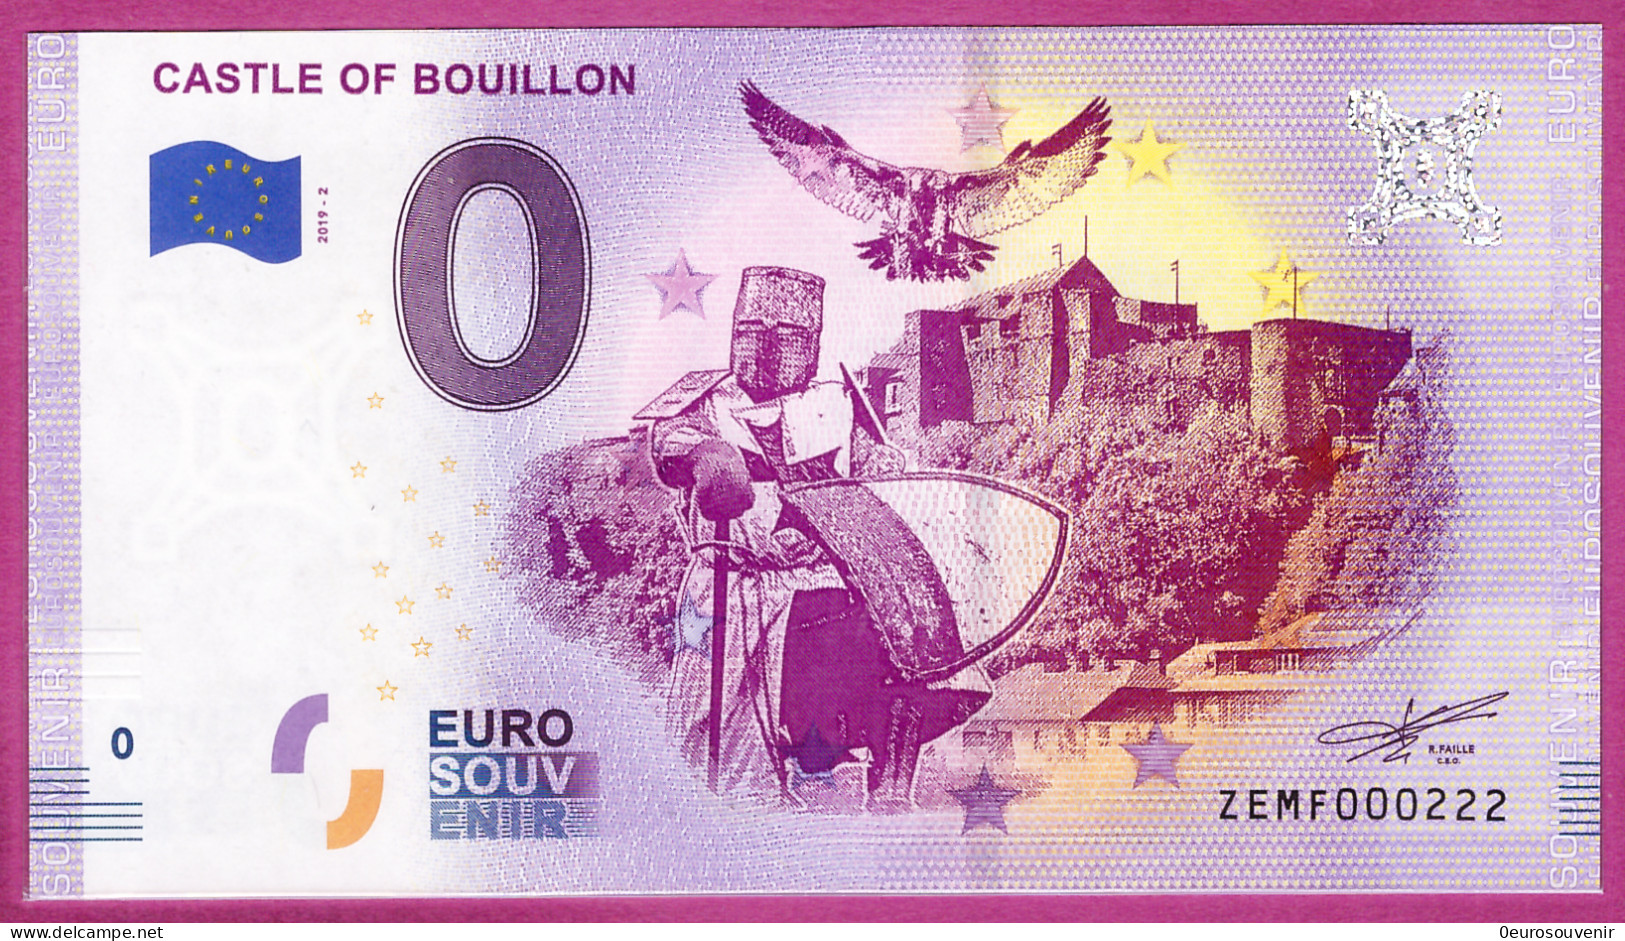 0-Euro ZEMF 2019-2 # 222 ! CASTLE OF BOUILLON - Private Proofs / Unofficial